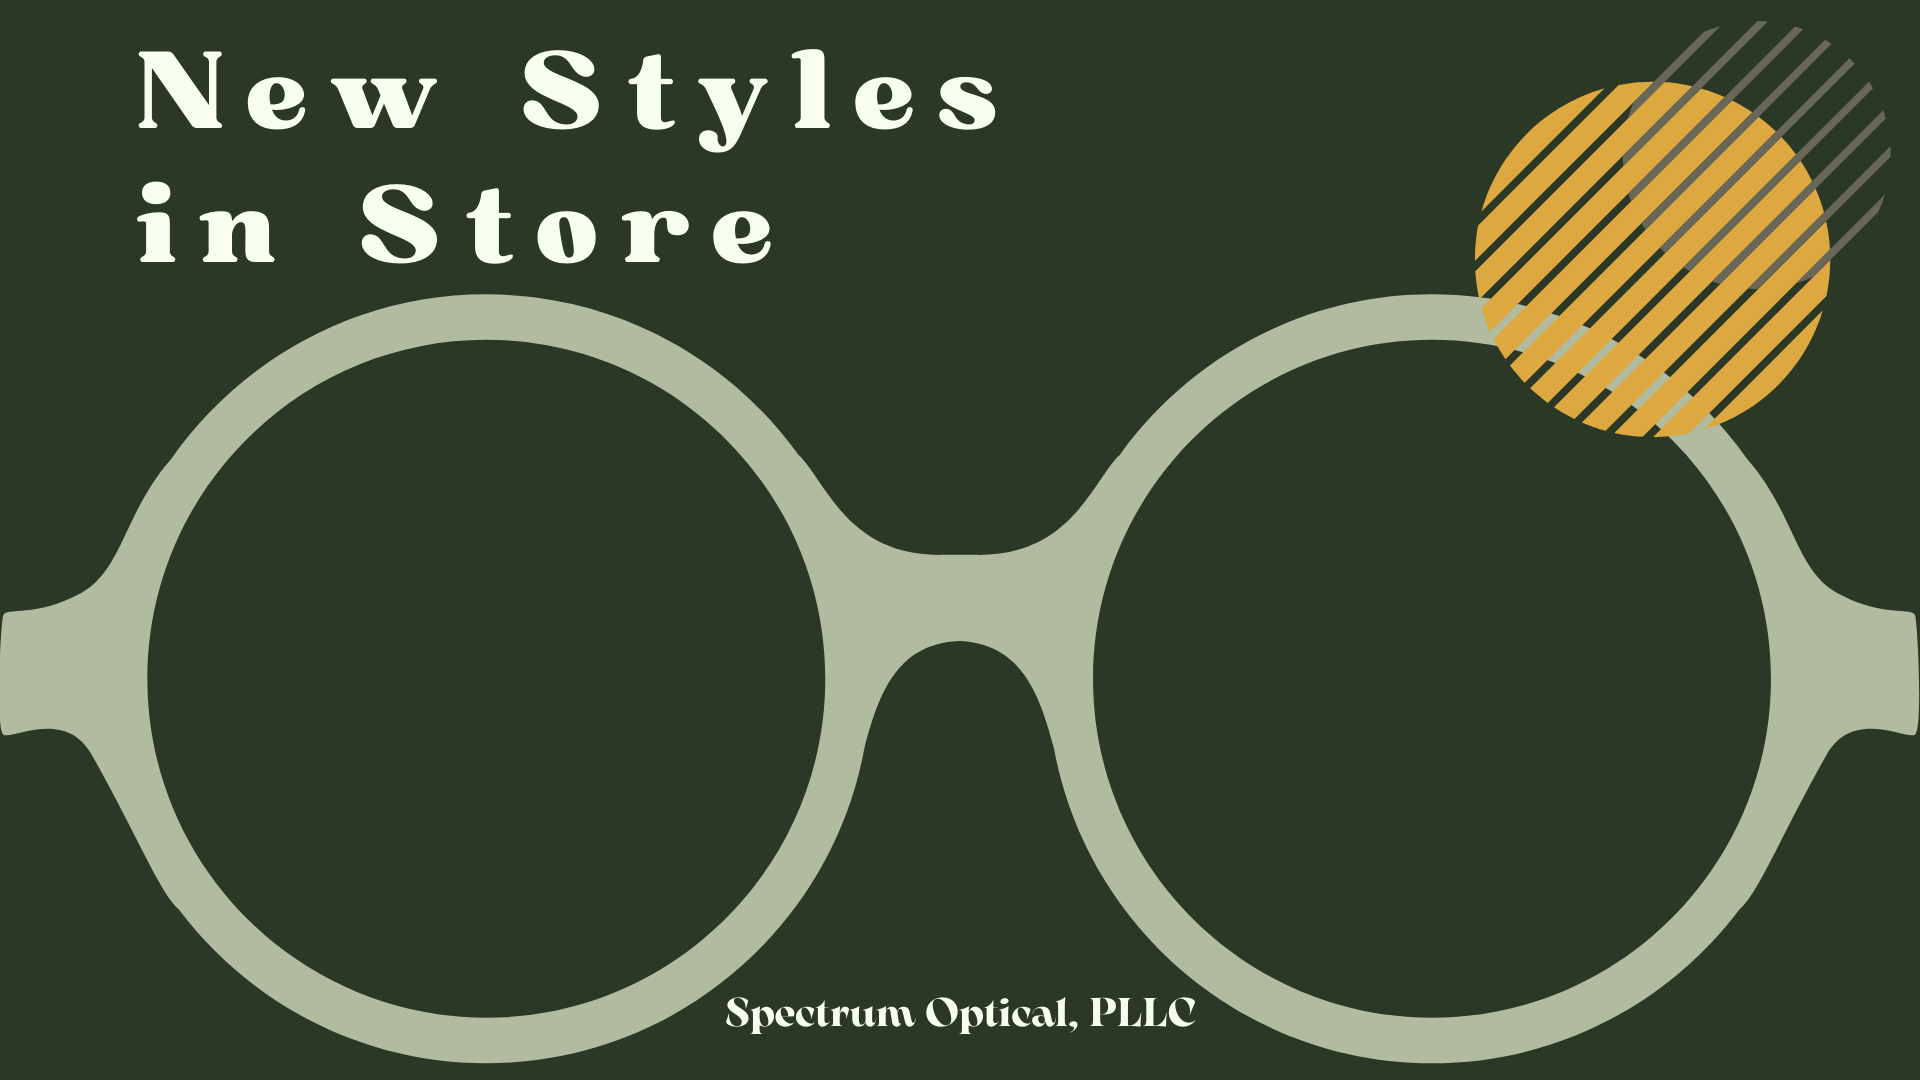 New Styles in Store. Over 800 frames in stock for you to try. Find your new favorite accessory!